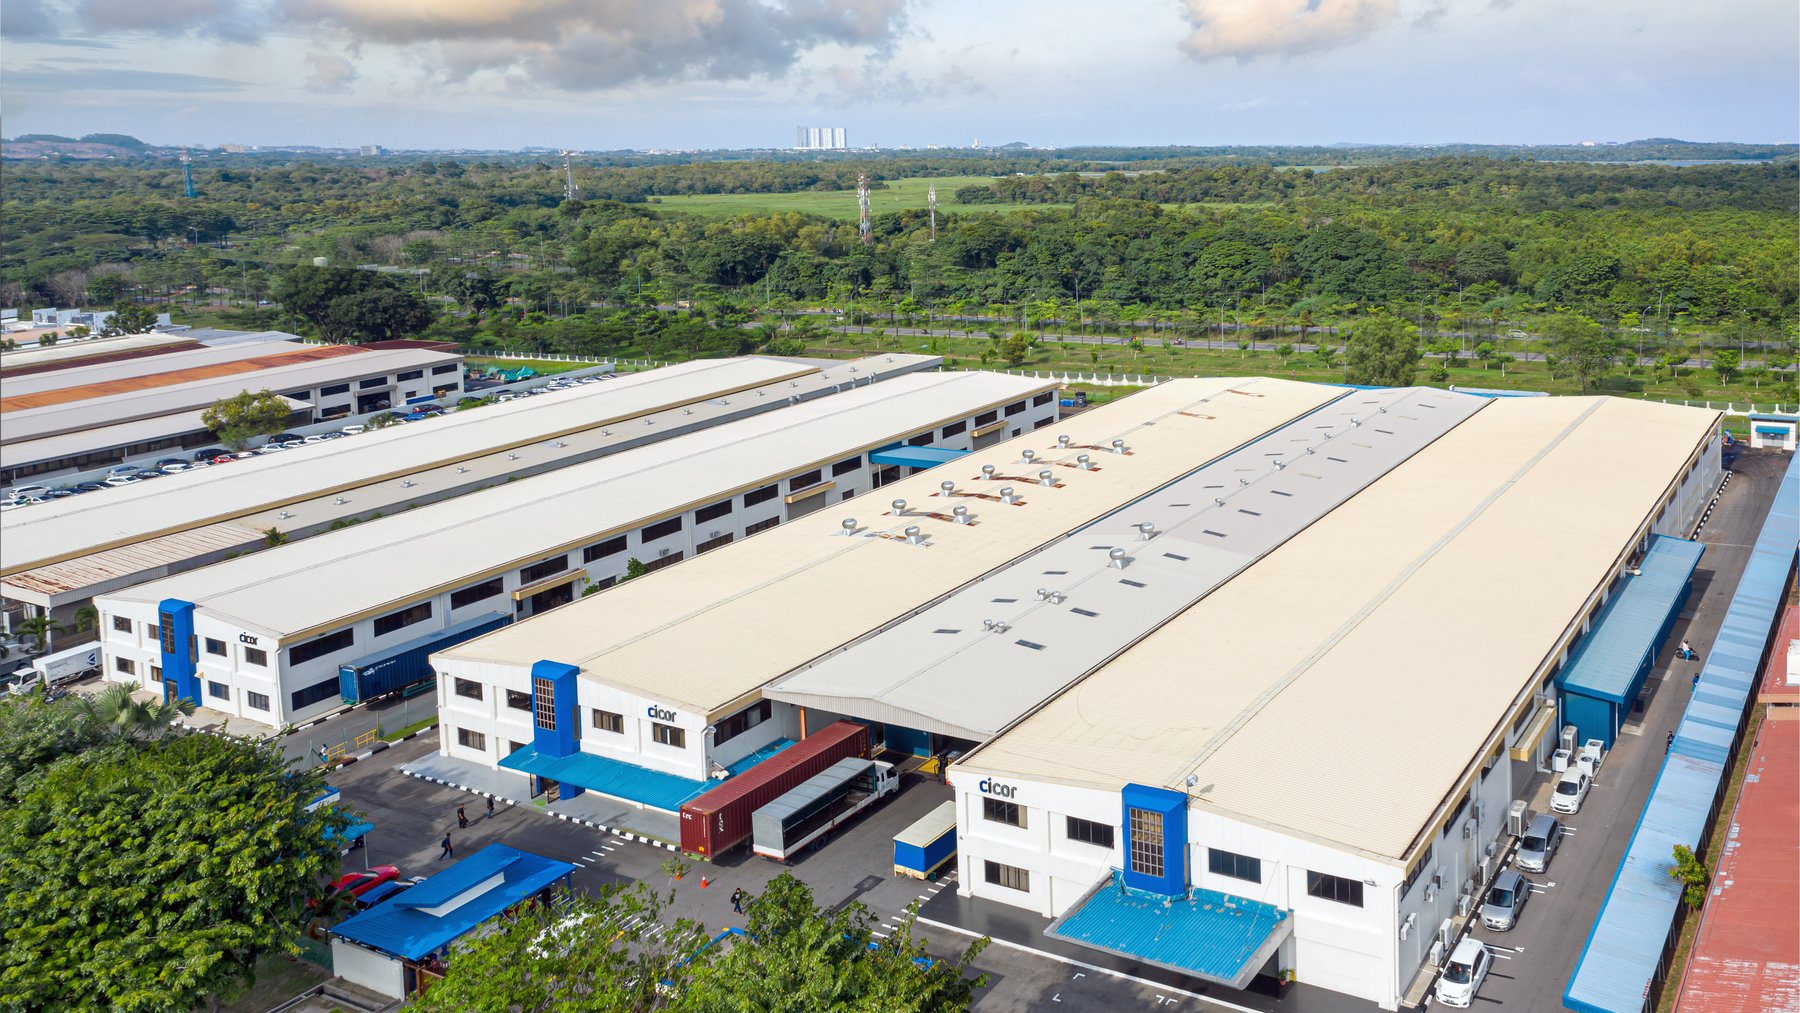 Cicor production site in Batam, Indonesia